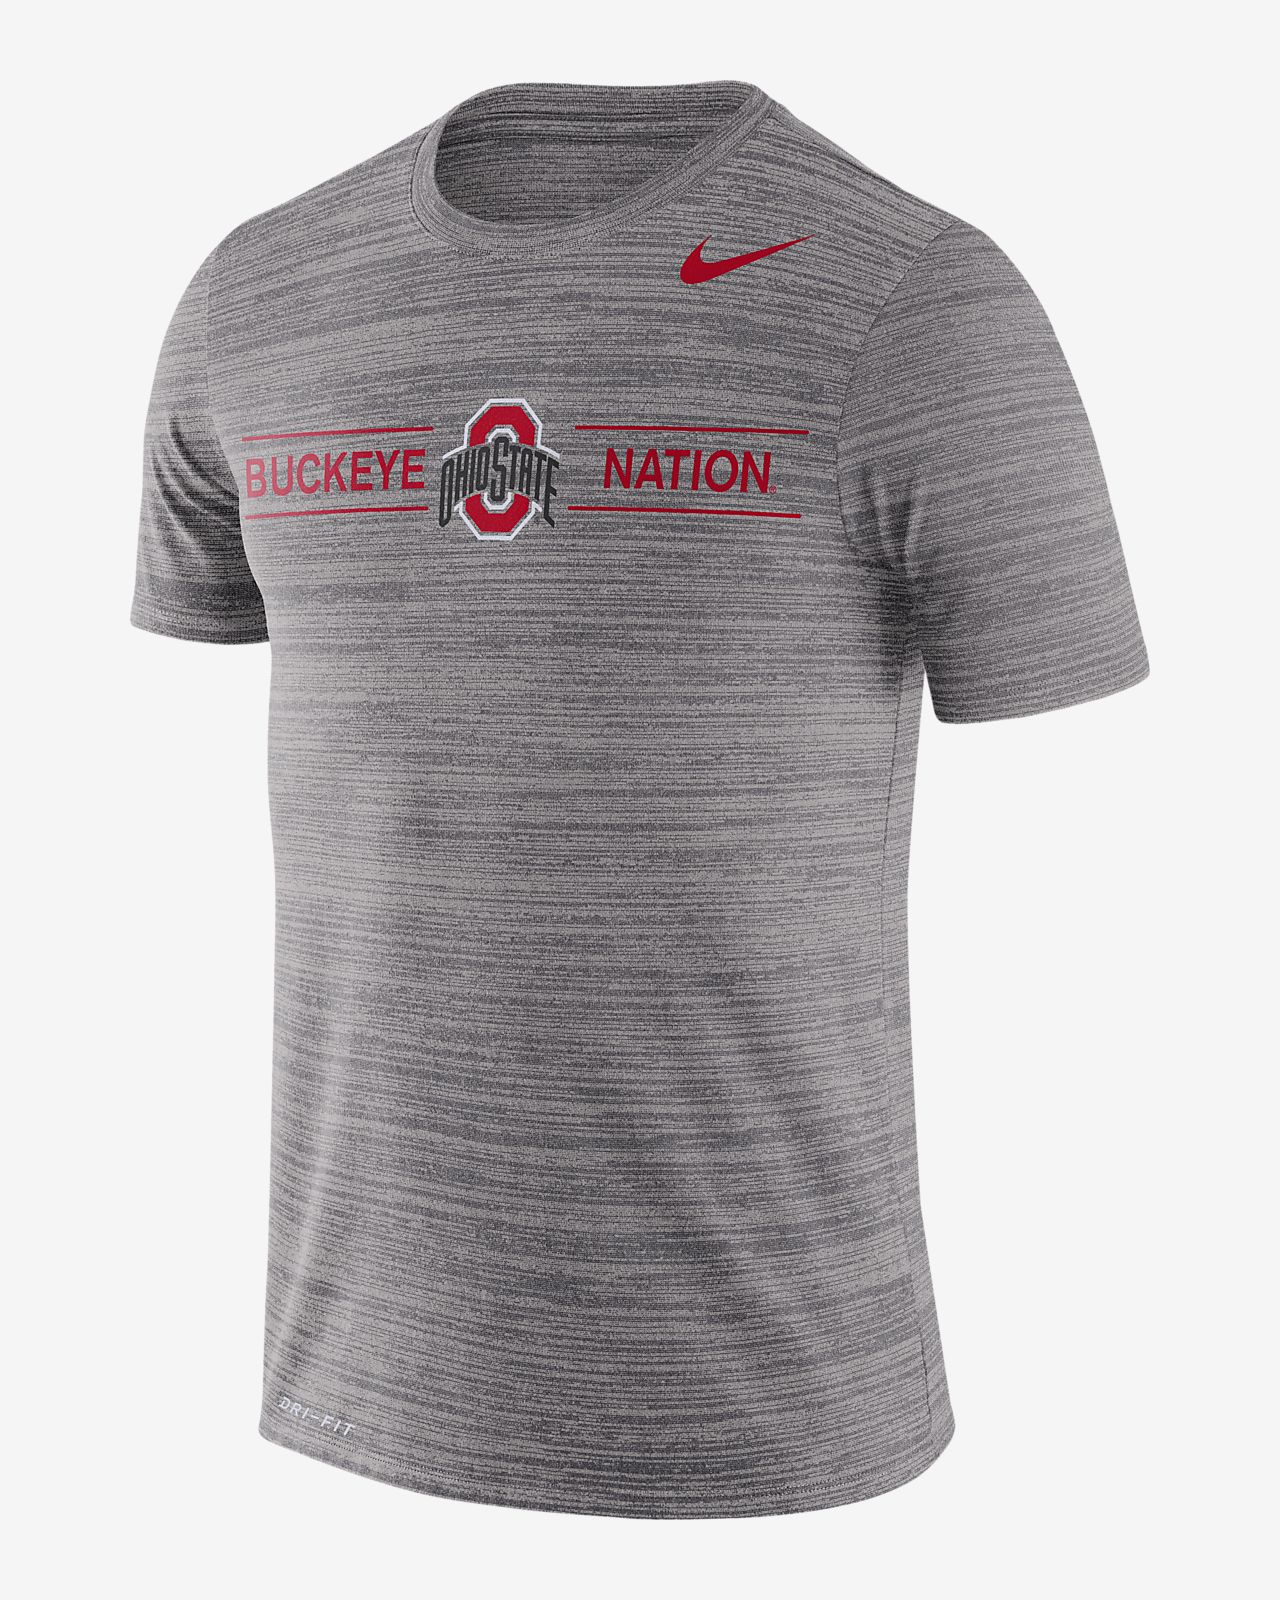 nike off campus long sleeve